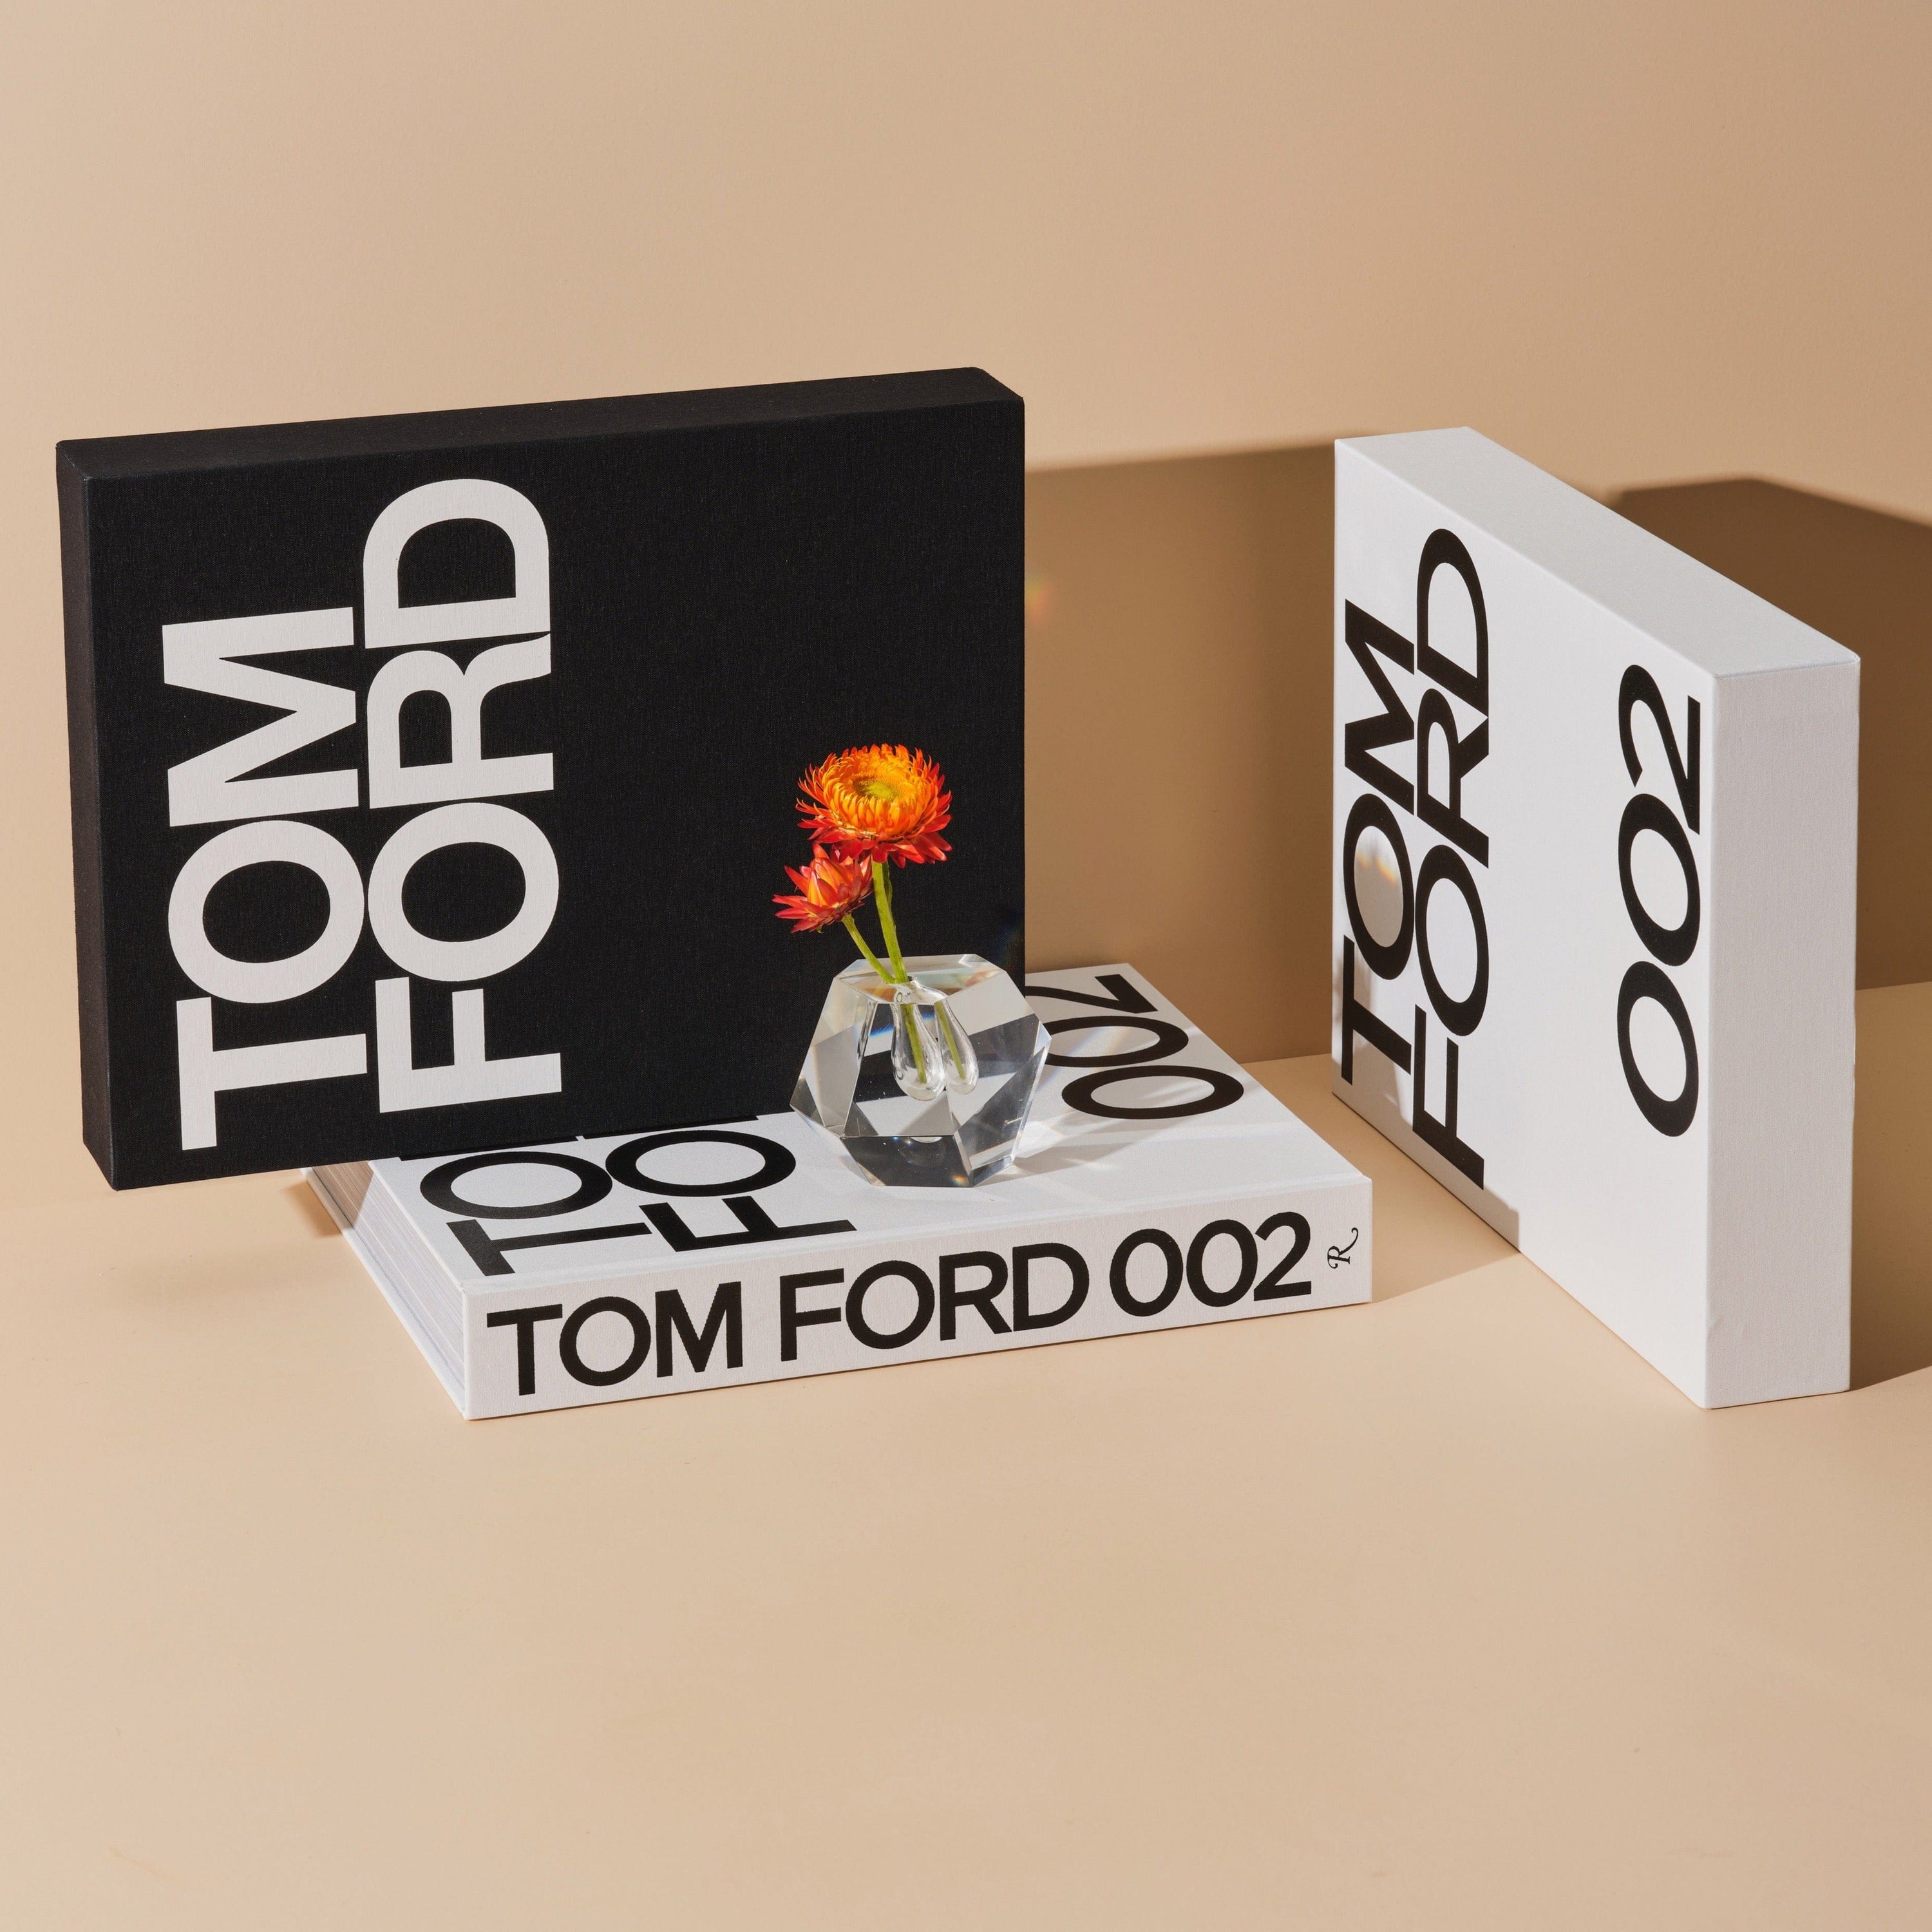 Tom Ford and Tom Ford 002